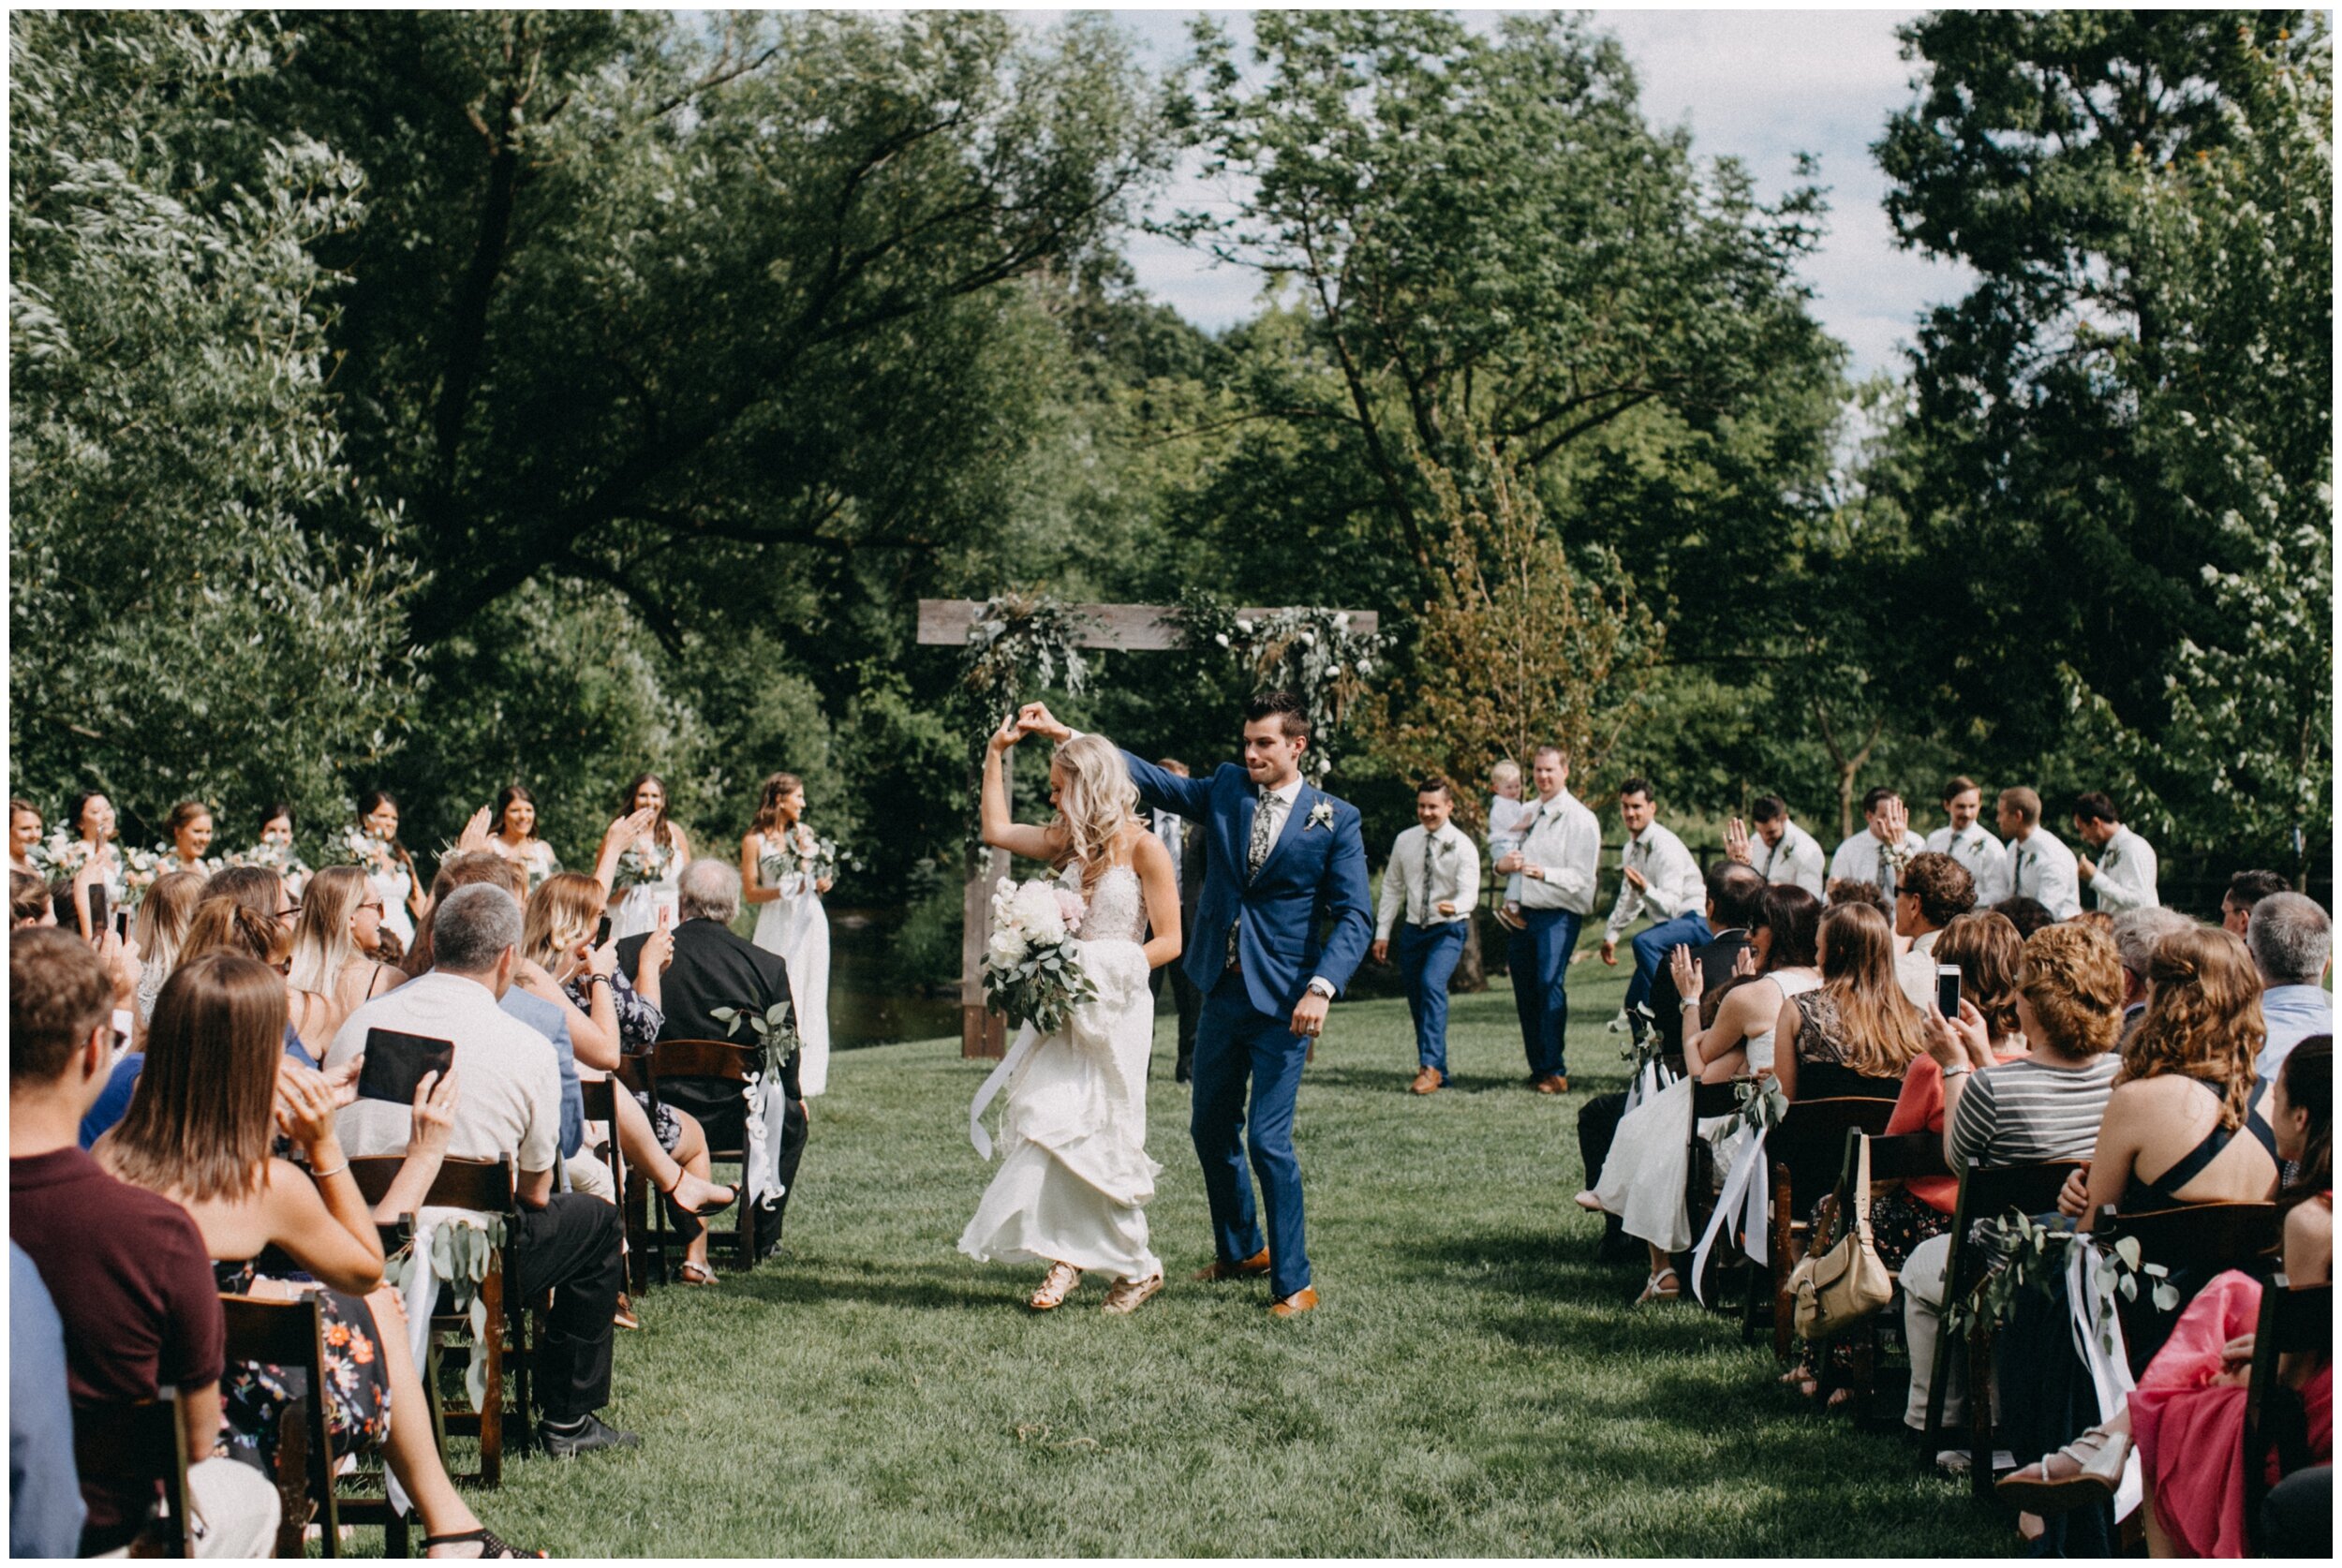 Groom spinning bride as they dance down aisle after outdoor barn wedding ceremony in Minnesota